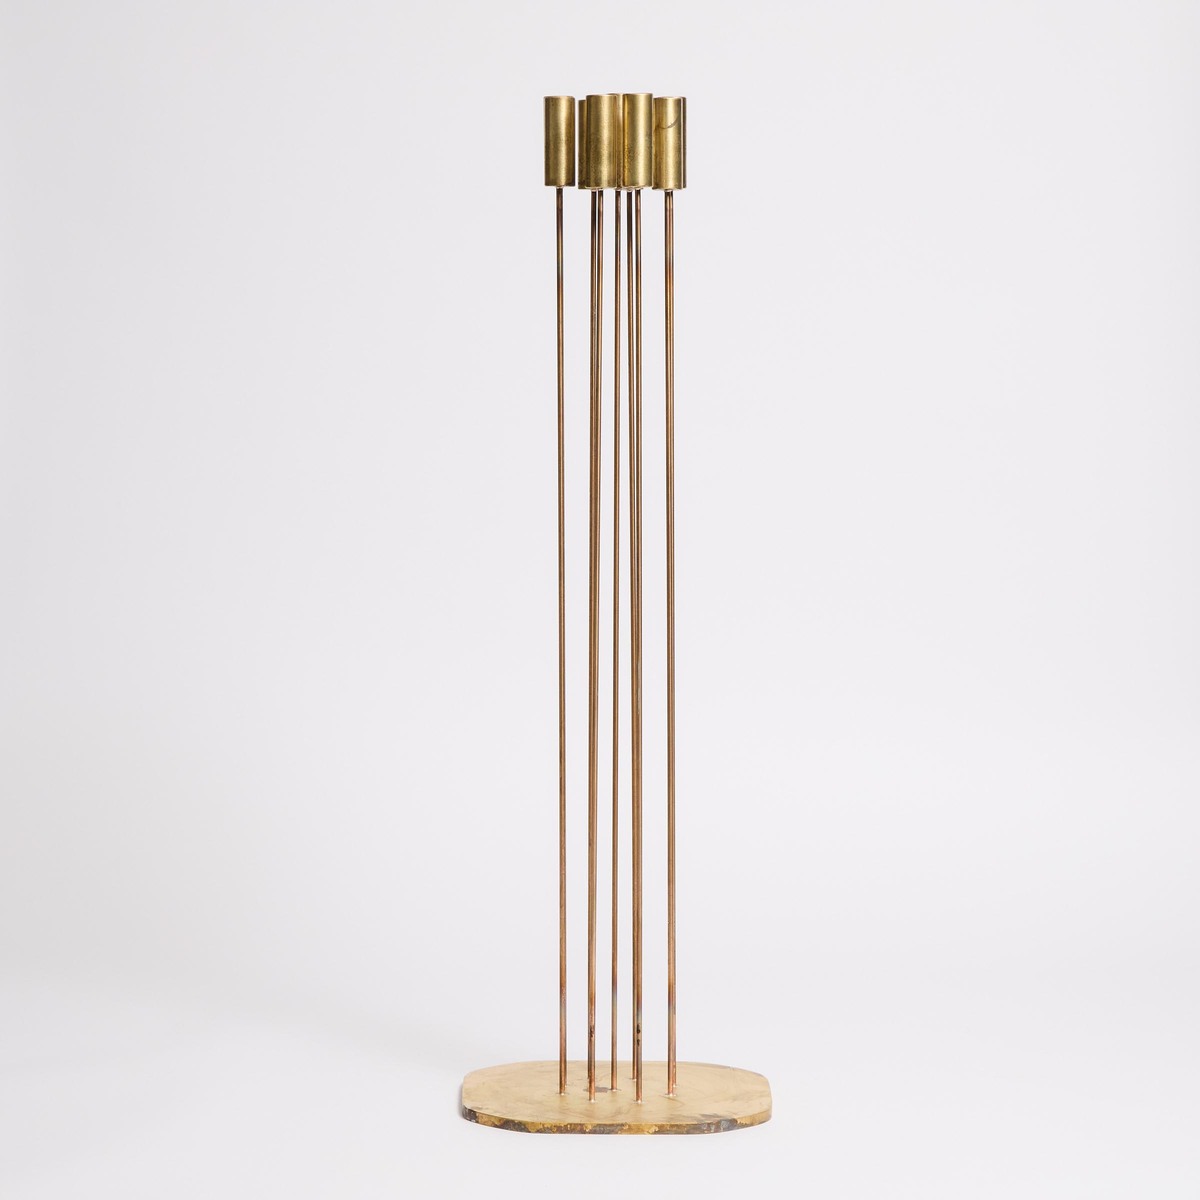 Val Bertoia (b. 1949), B-2858, 1 SURROUNDED BY 8 SOUNDS GREAT, 2024, incised title "B-2858" on base